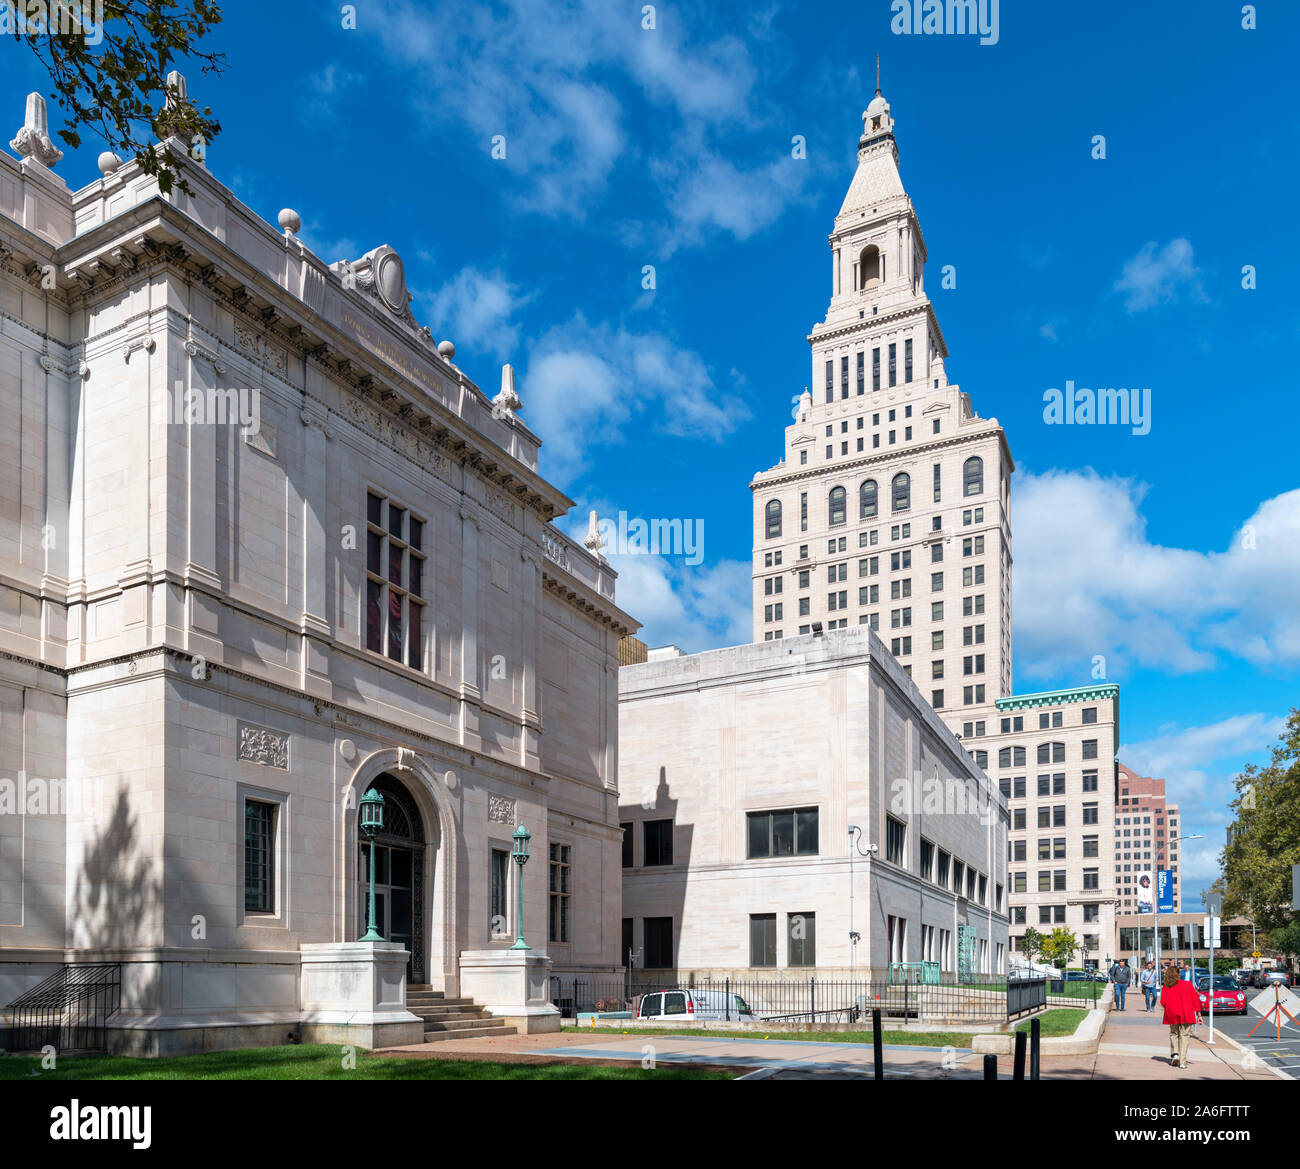 The Wadsworth Atheneum art museum looking towards the Travelers Tower on Prospect Street in downtown Hartford, Connecticut, USA Stock Photo